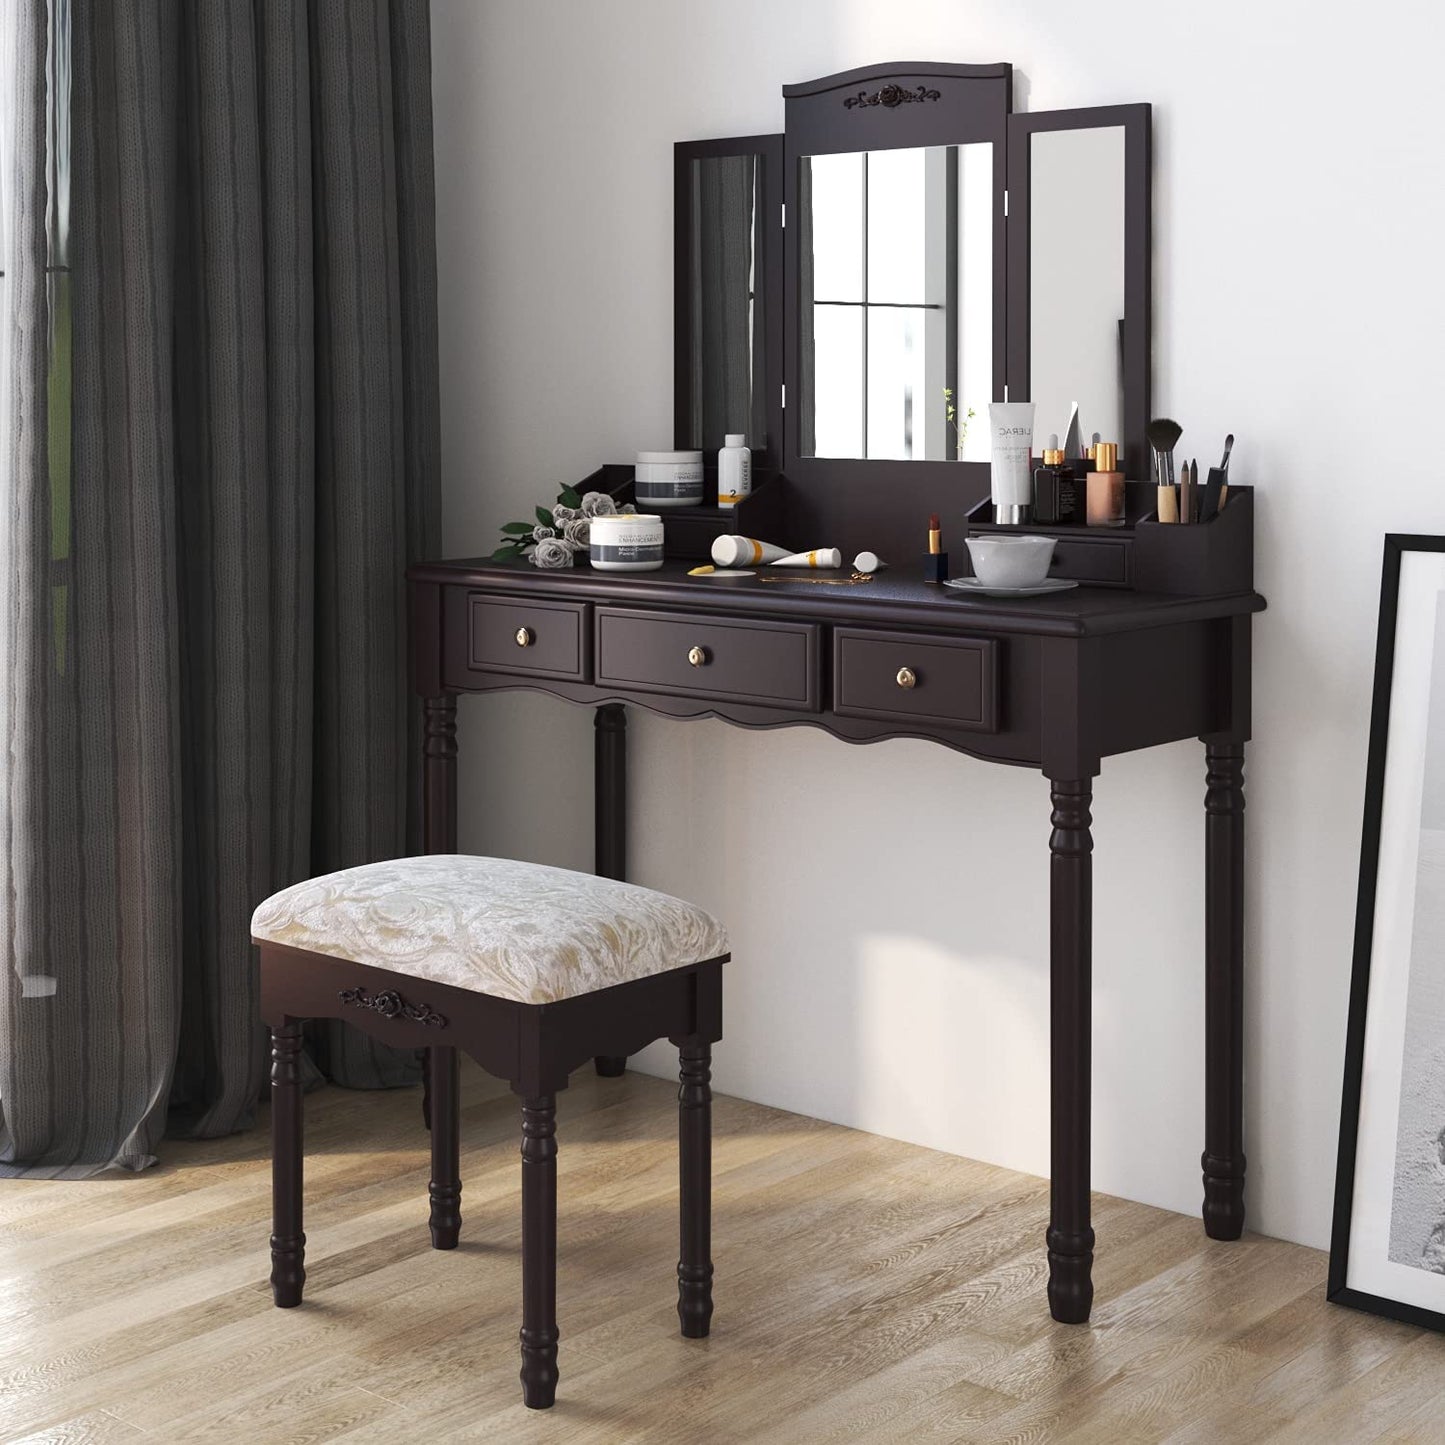 Dressing Table: Black, Brown and White Dressing Table with 5 Drawers